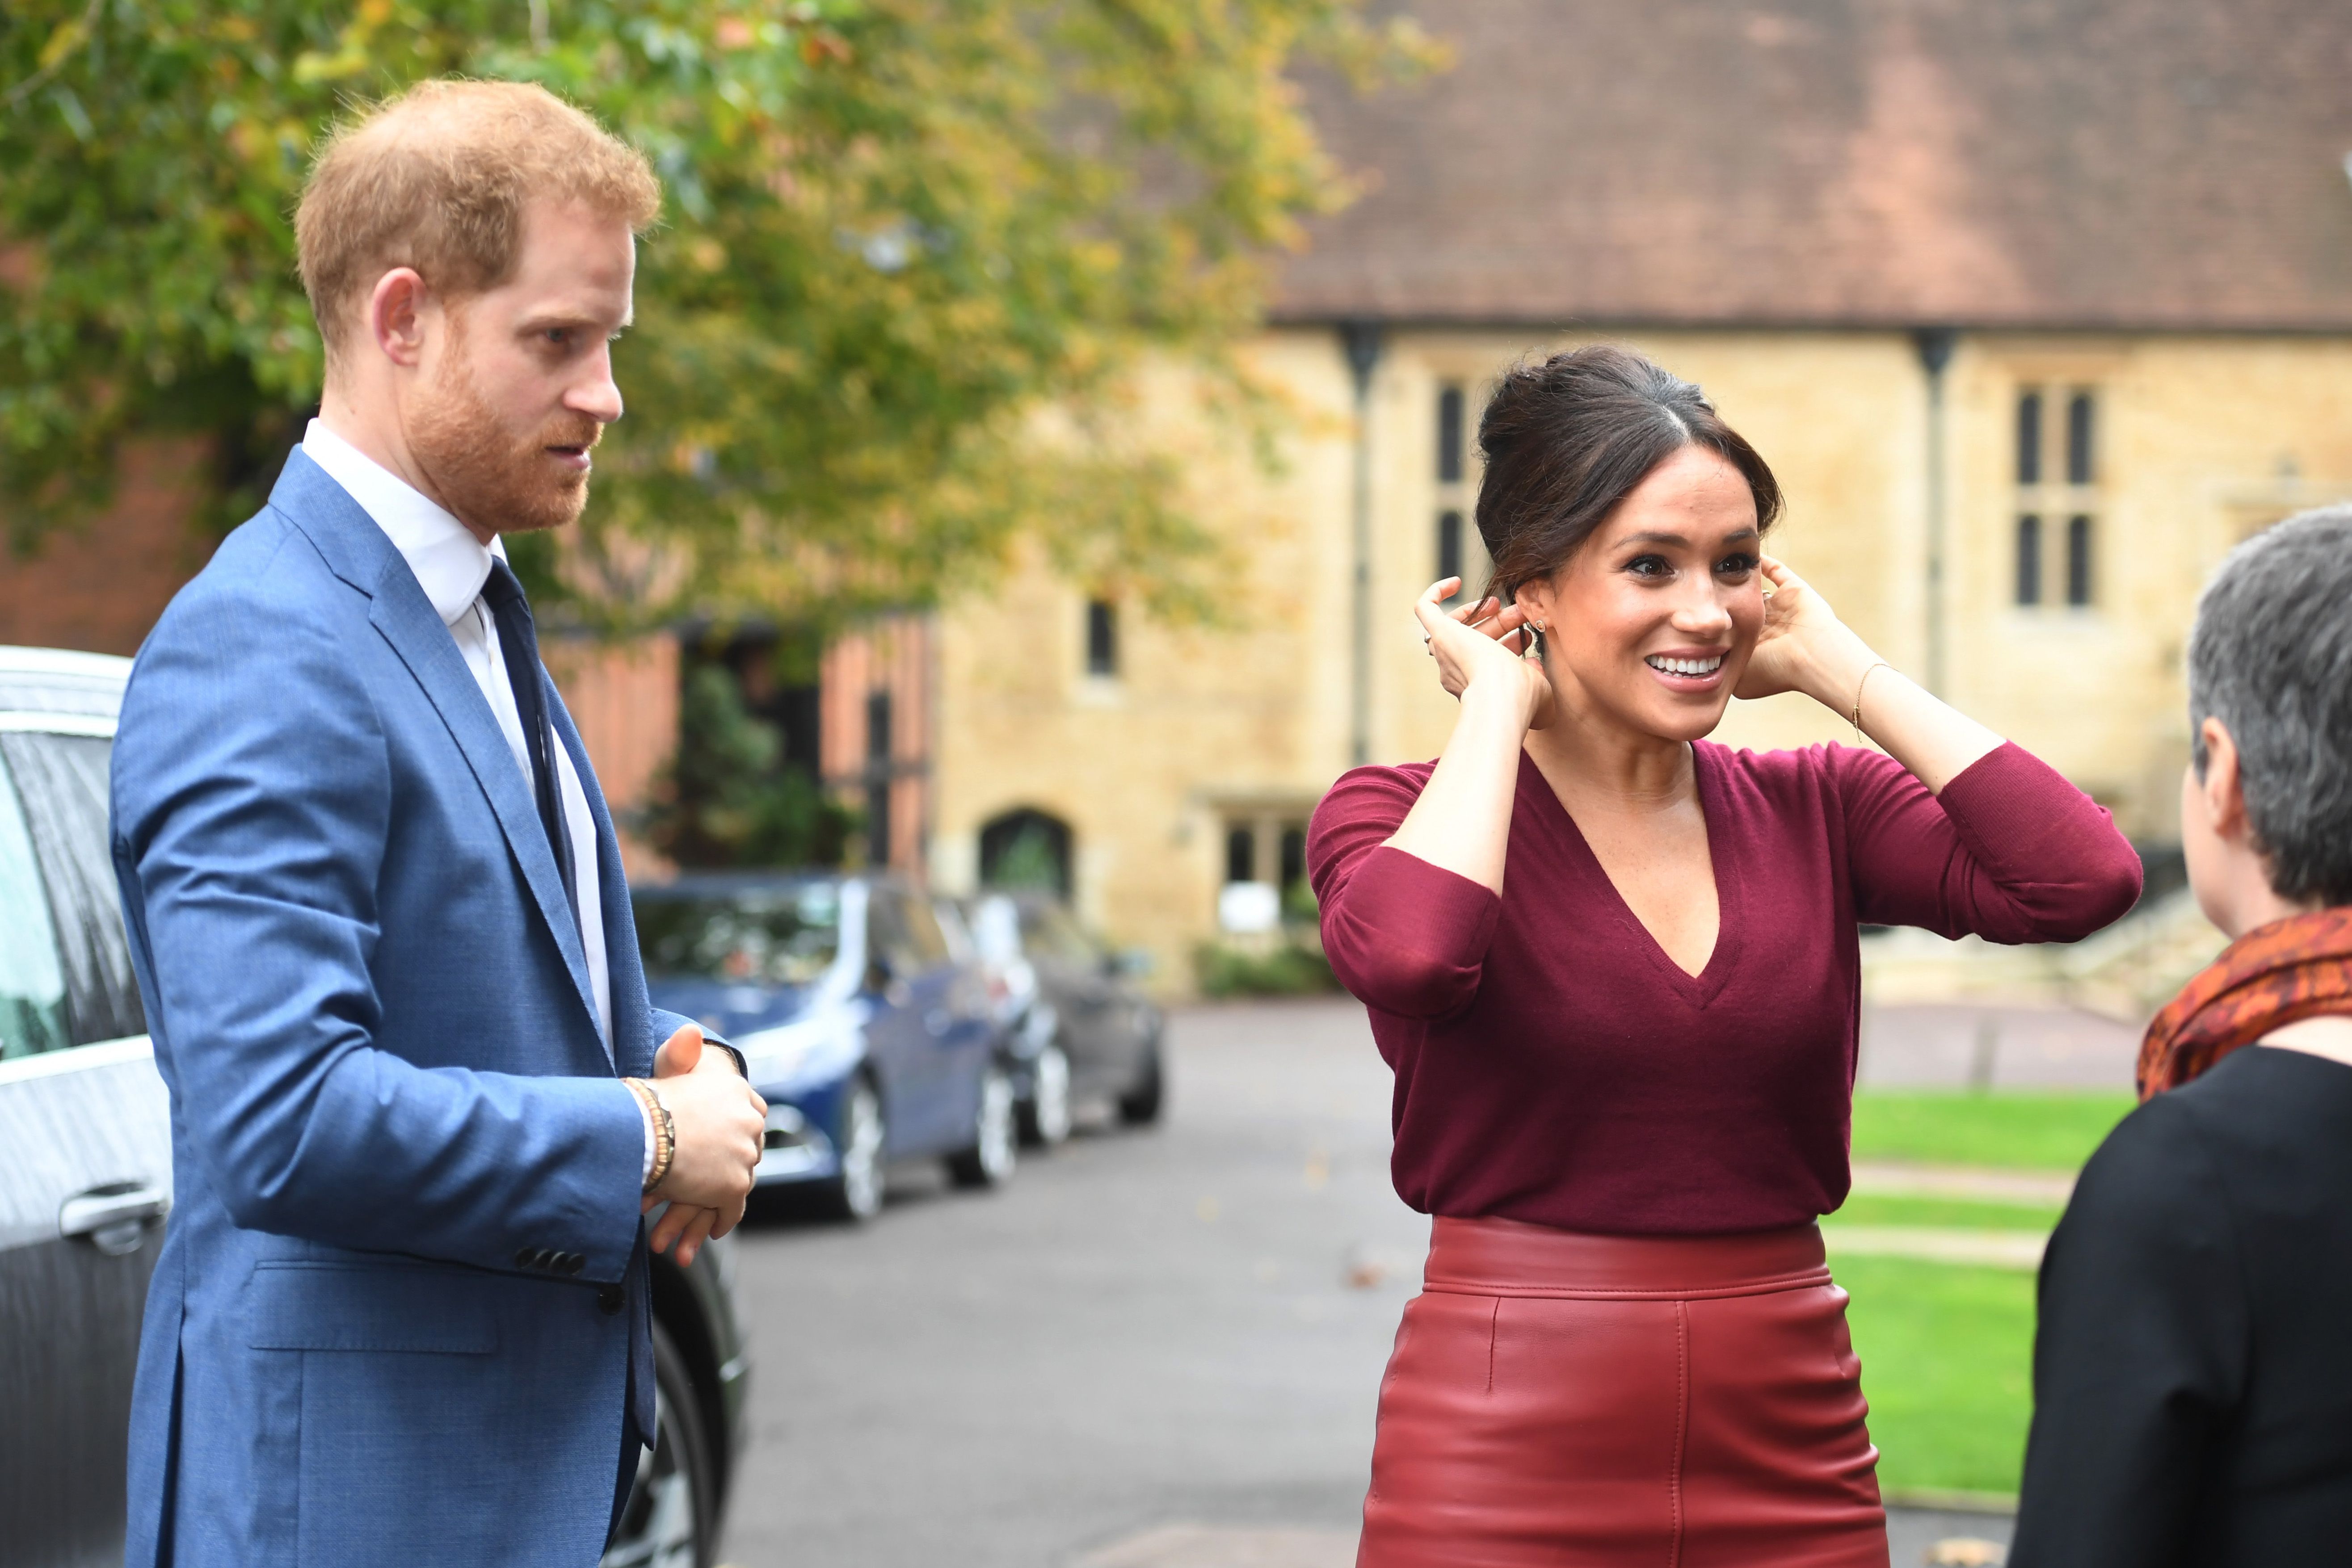 meghan markle leather skirt outfit